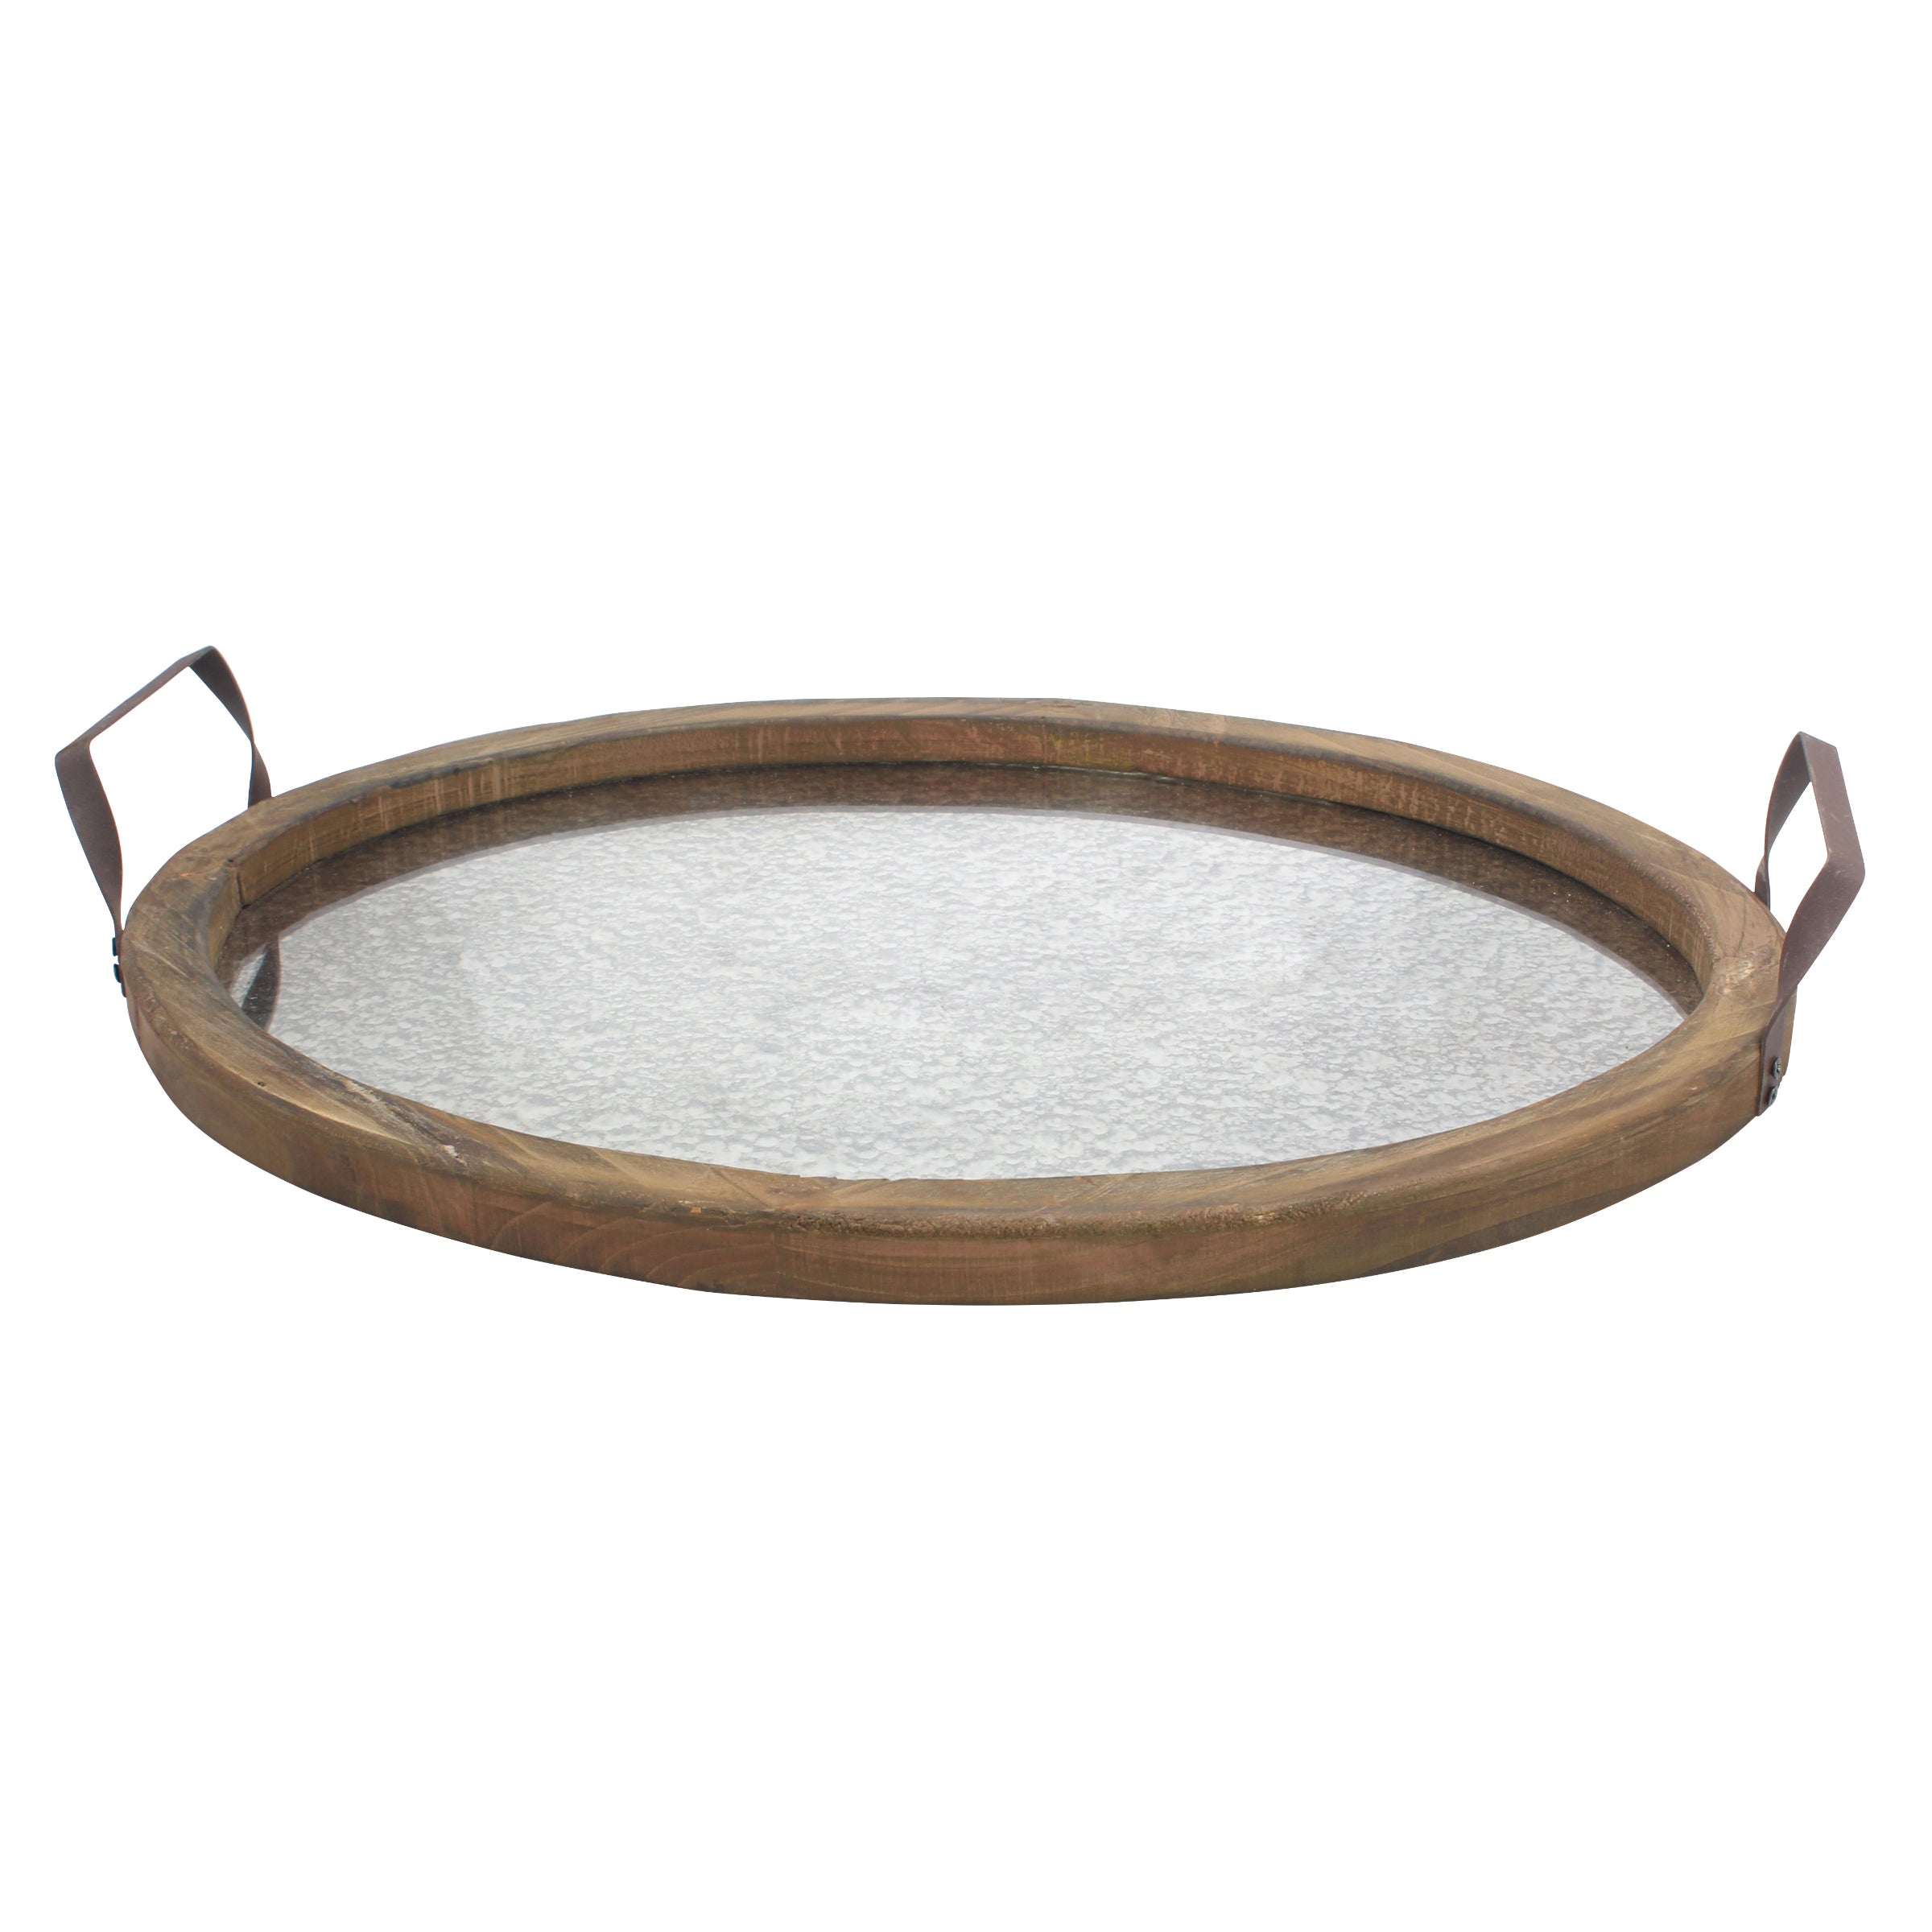 Oval wooden tray - Brown/Mango wood - Home All